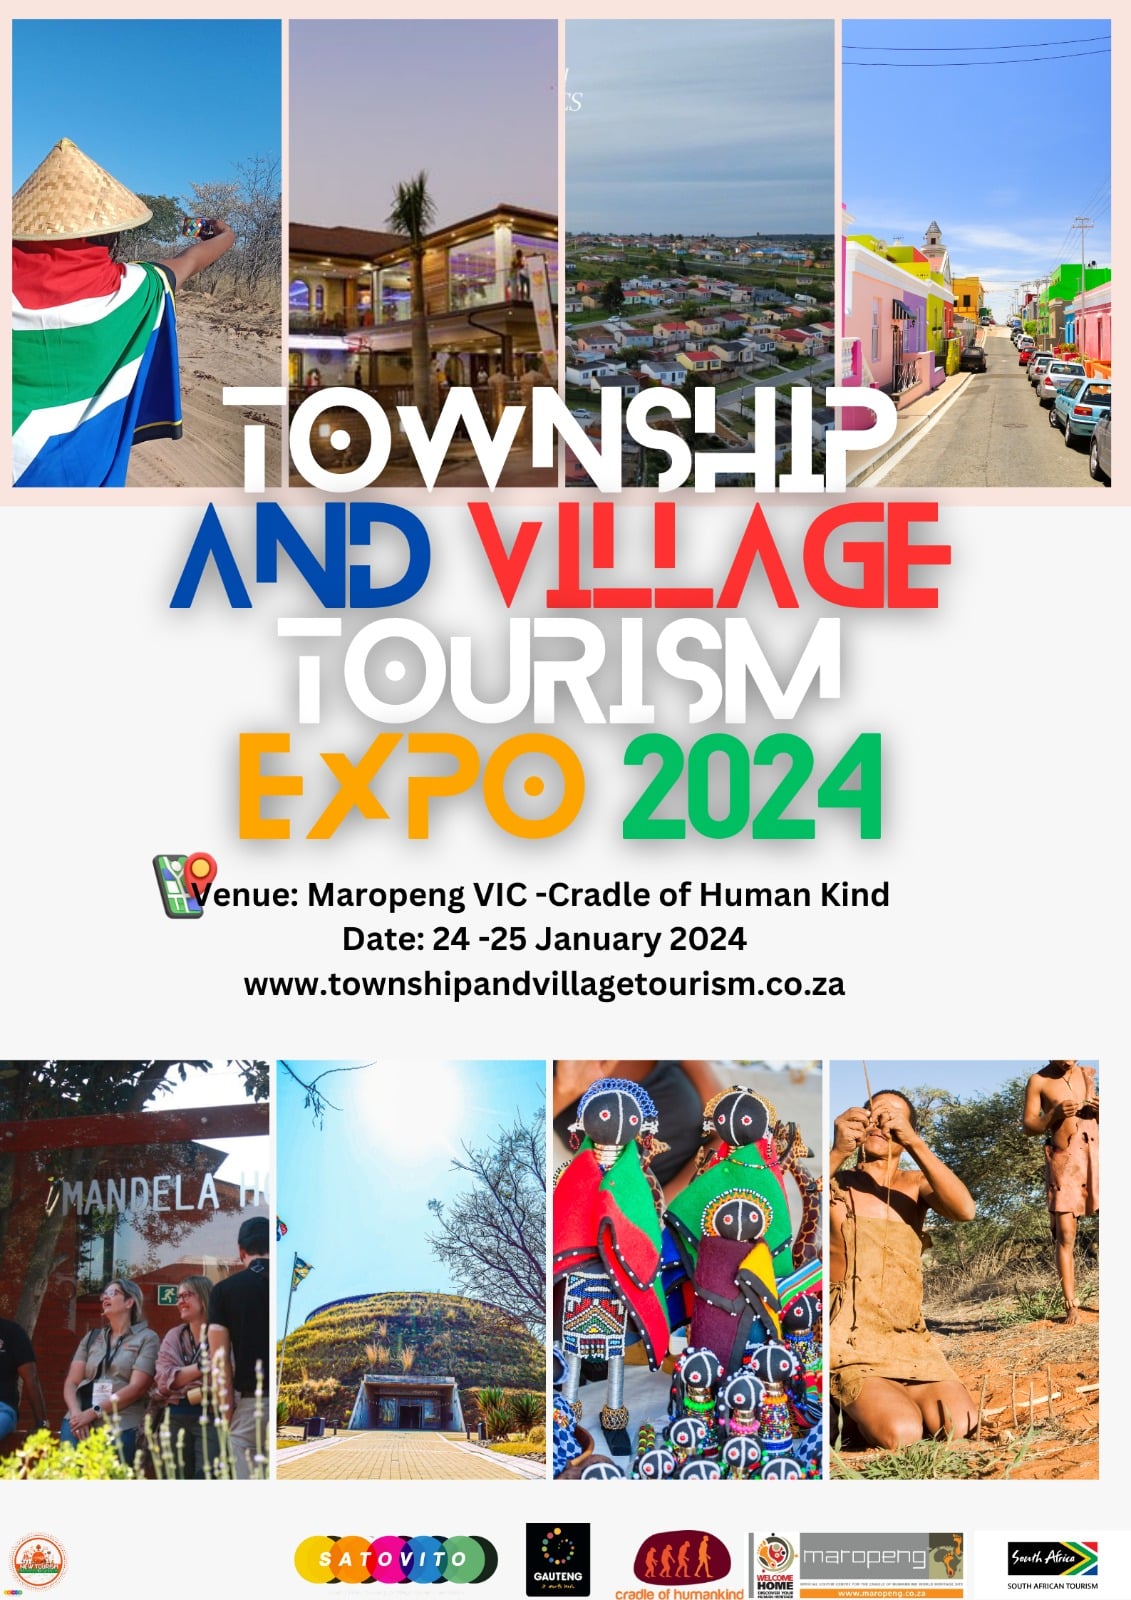 Township and Village Tourism Expo